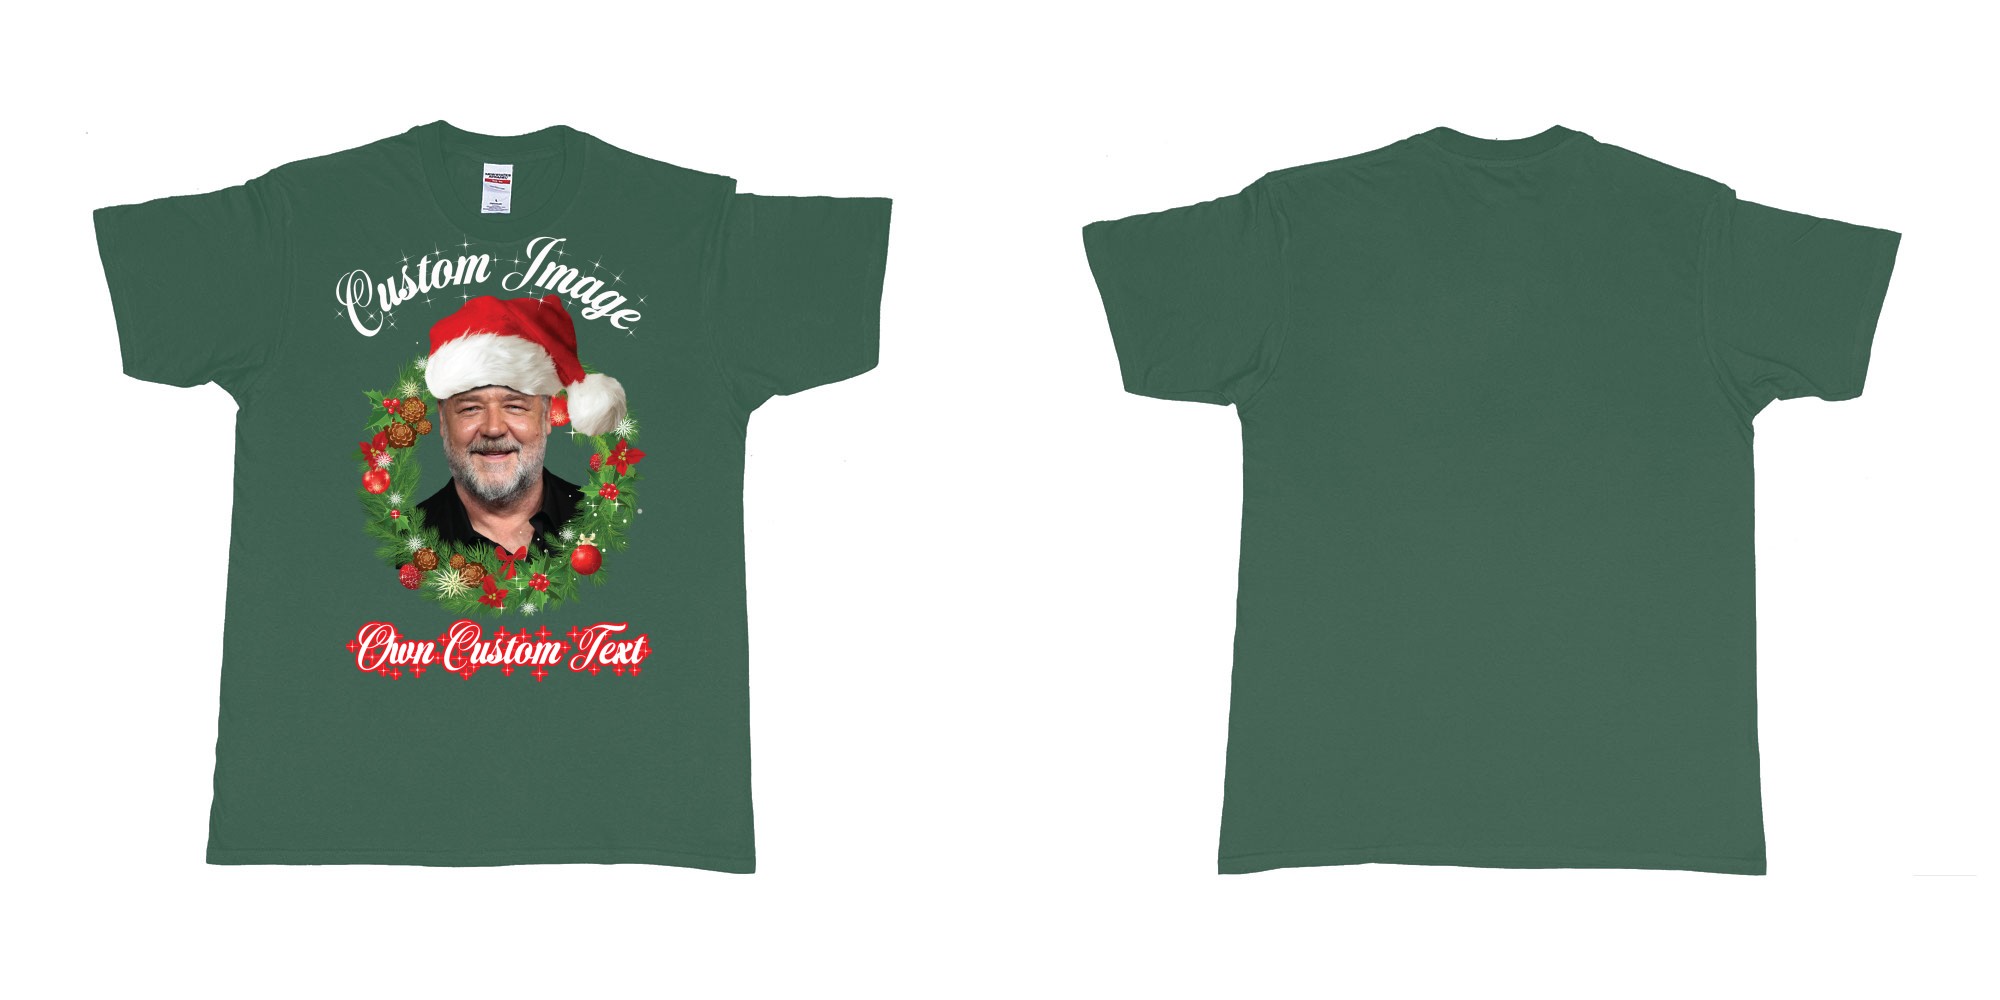 Custom tshirt design christmas wreath custom face image text in fabric color forest-green choice your own text made in Bali by The Pirate Way